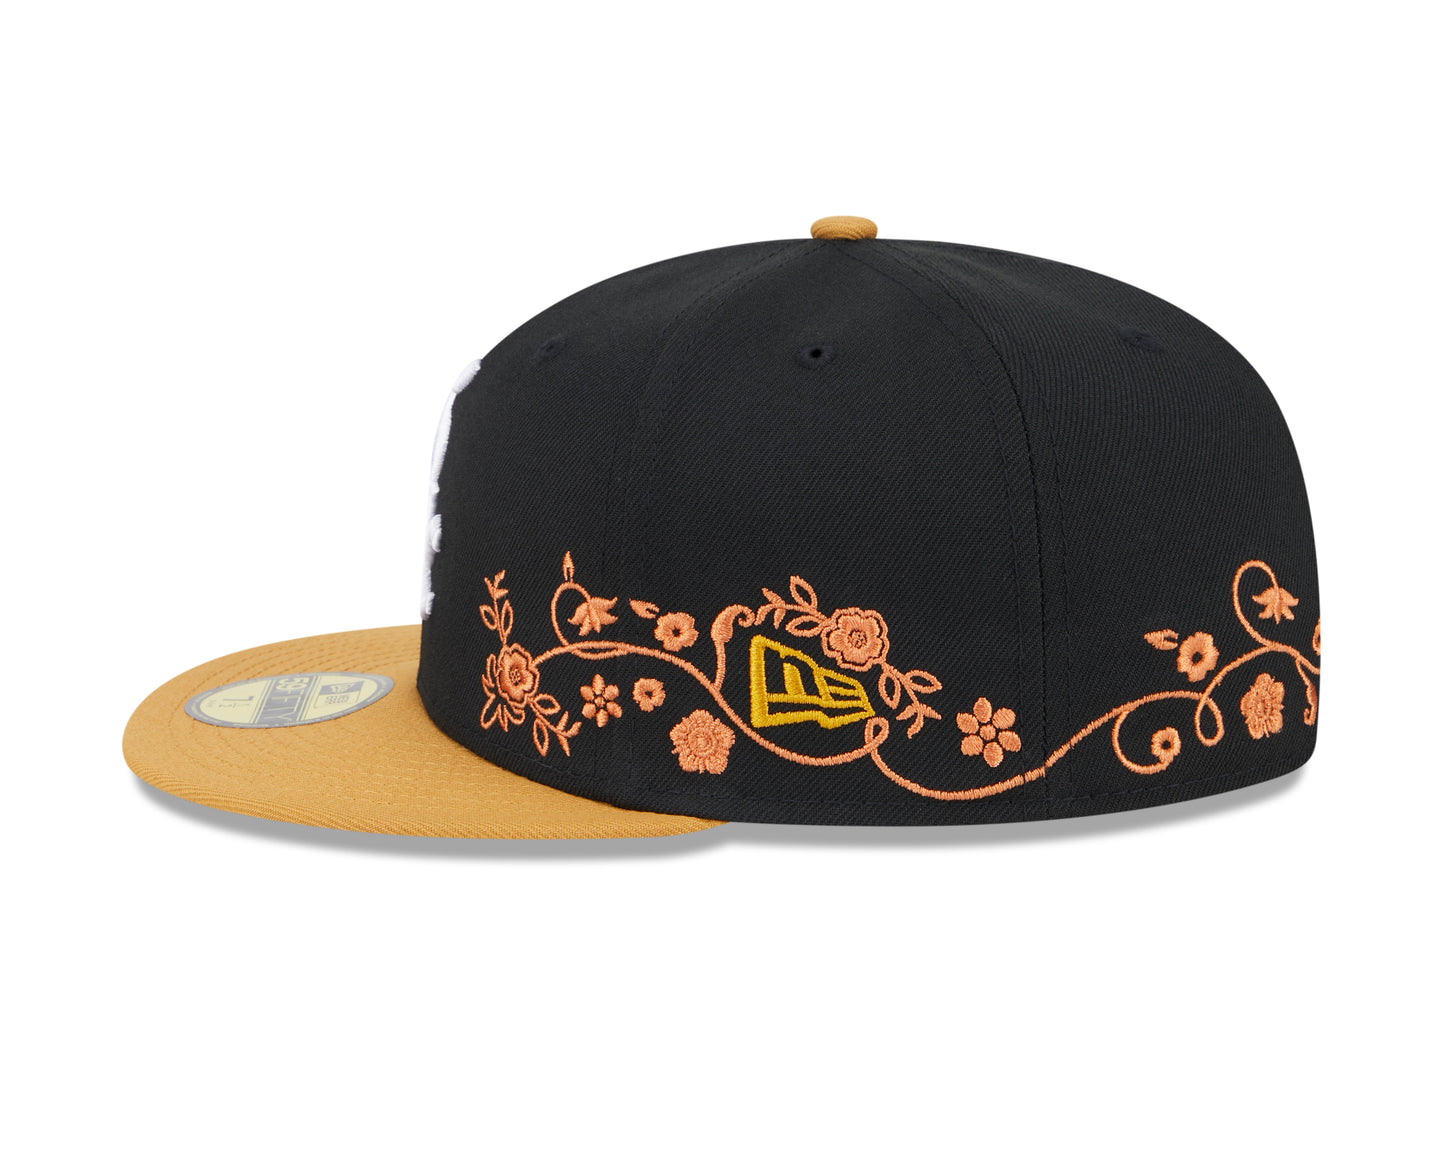 New Era - 59Fifty Fitted - FLORAL VINE - Chicago White Sox - Black - Headz Up 